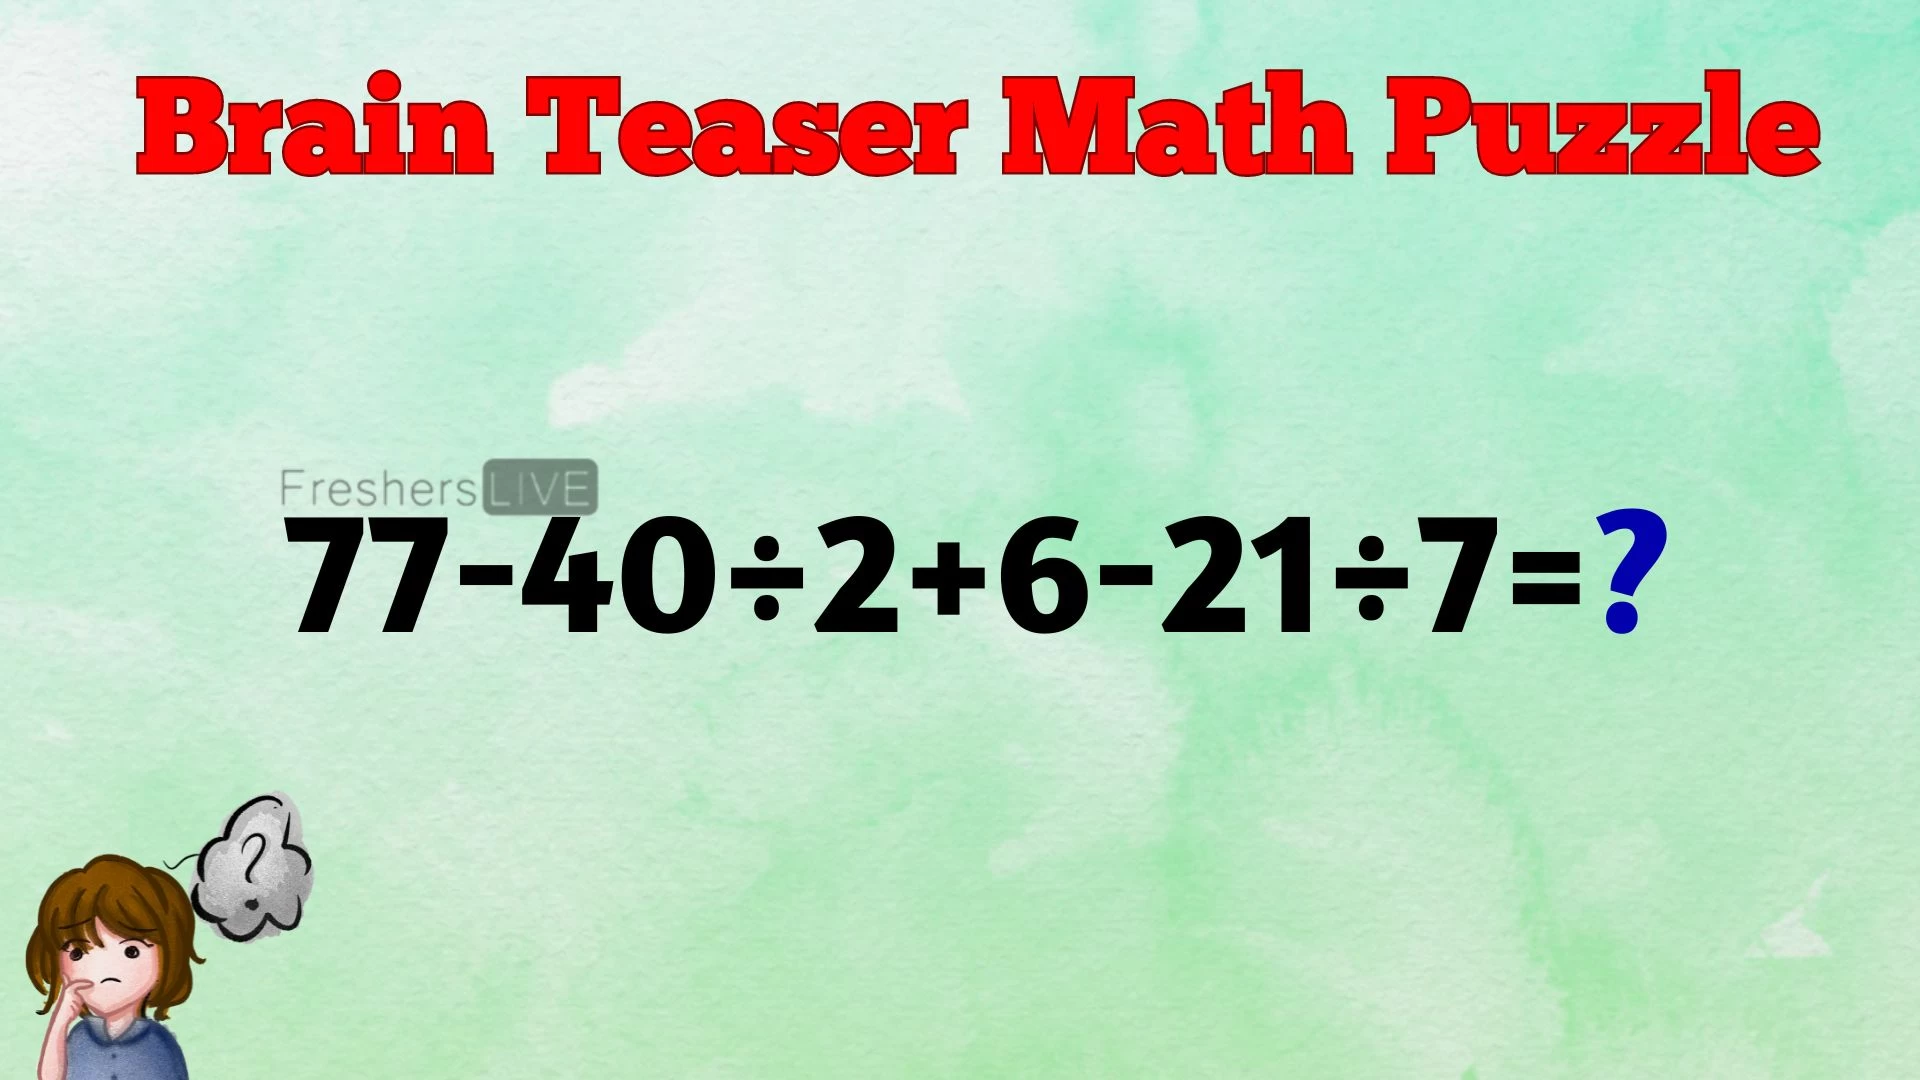 Can You Solve This Math Puzzle? Equate 77-40÷2+6-21÷7=?